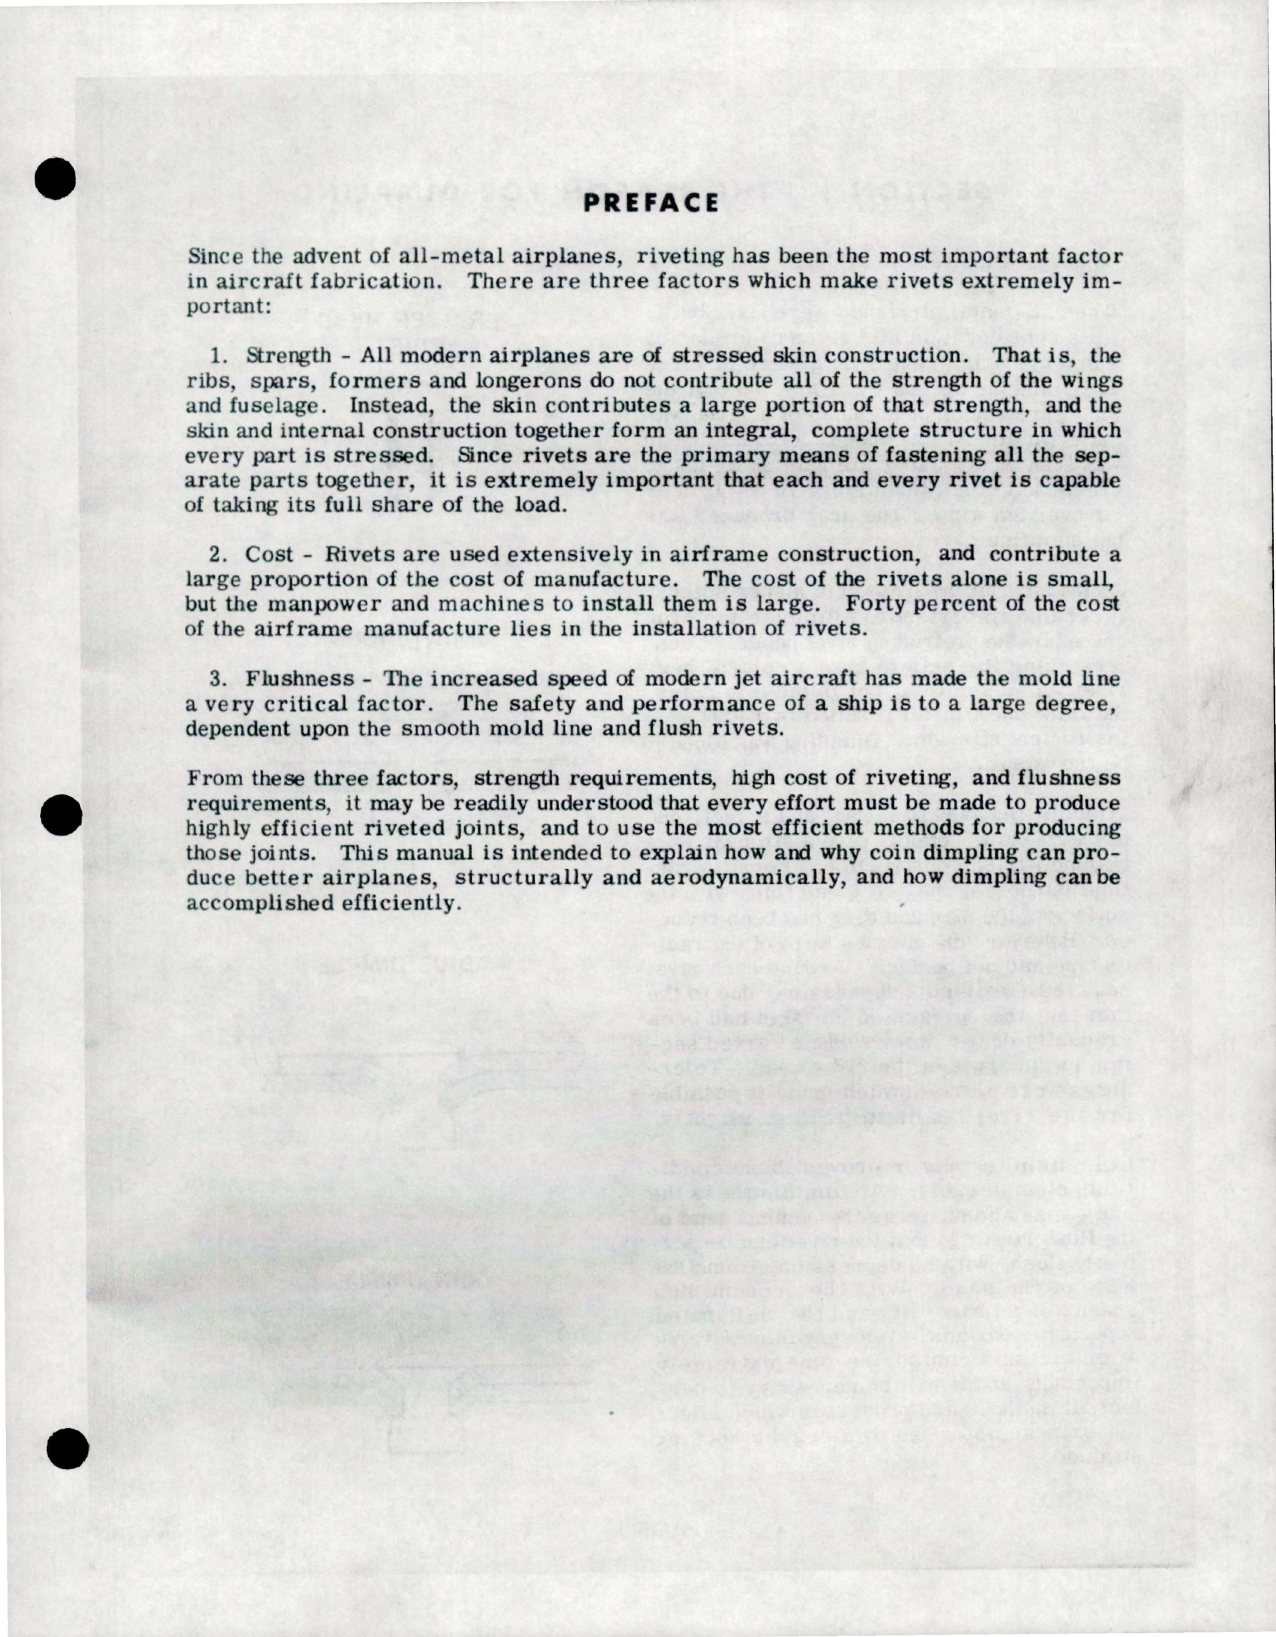 Sample page 7 from AirCorps Library document: Operators Manual for Coin Dimpling